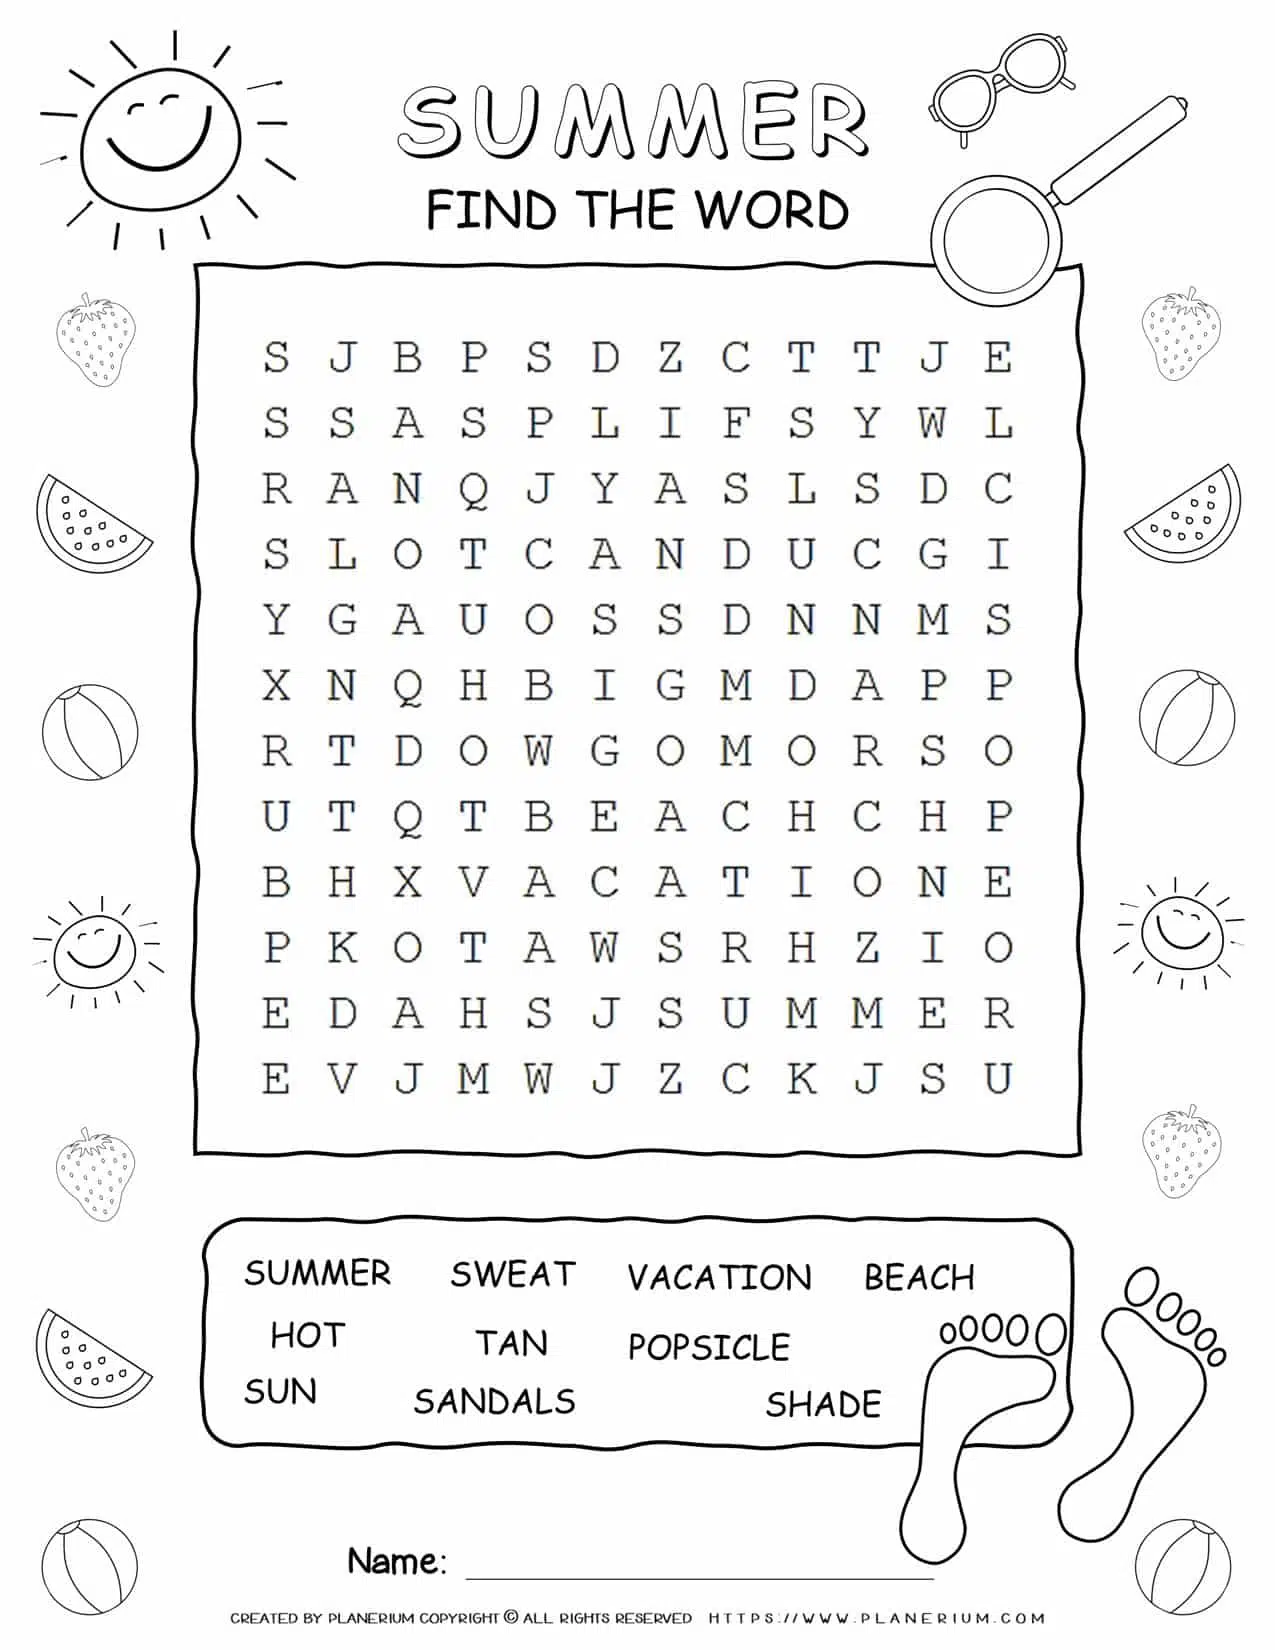 Printable summer word search with ten words for kids